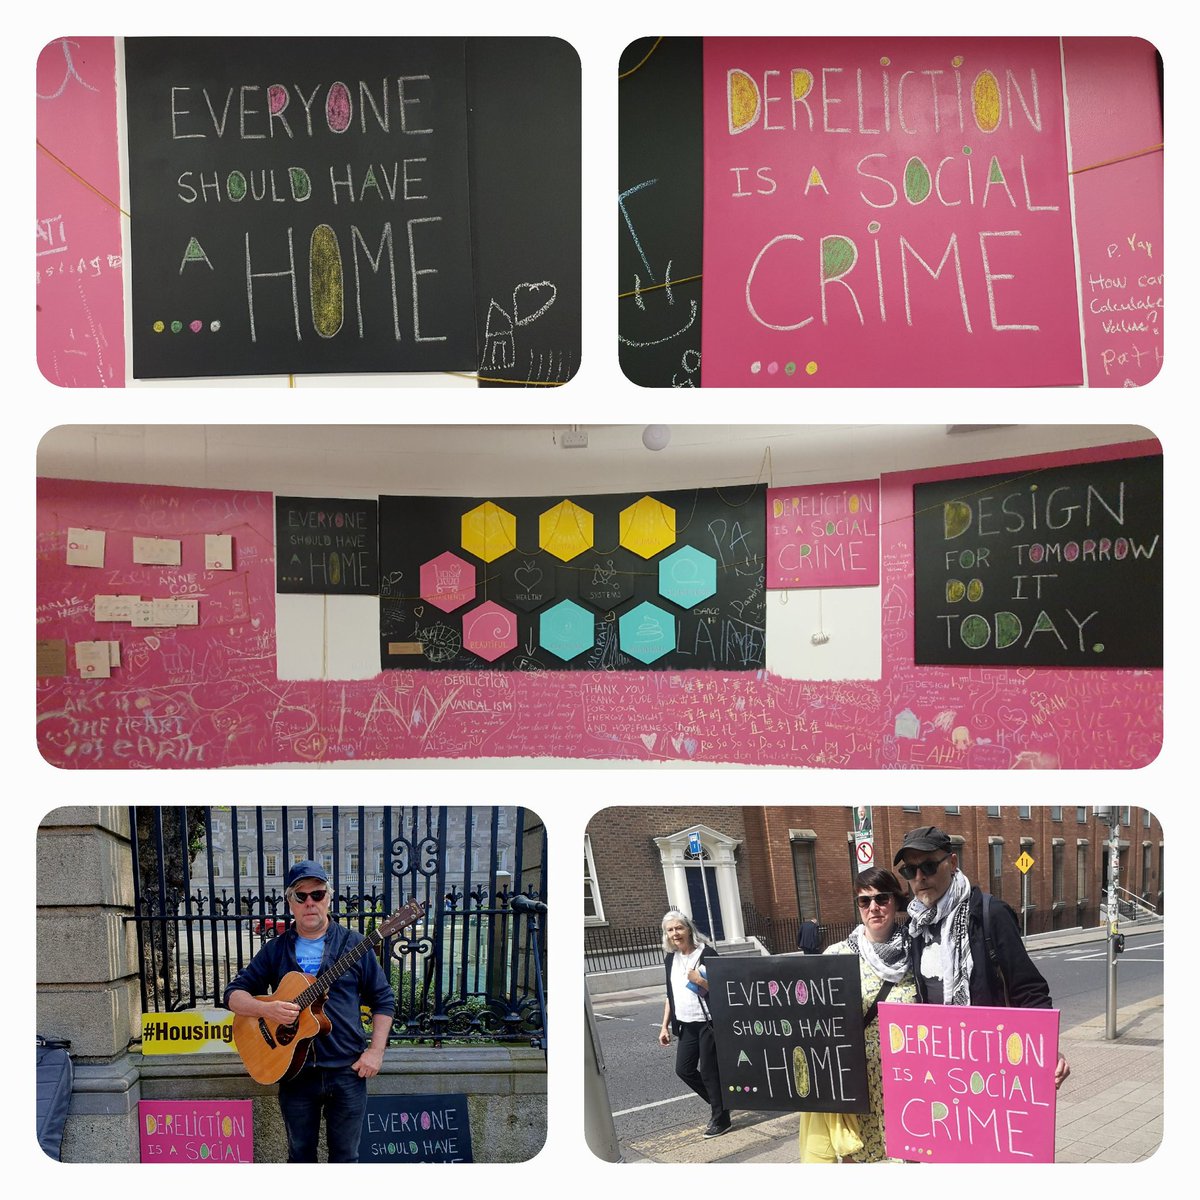 After yesterday's Dáil trip to #everyoneshouldhaveahome protest delighted to give these chalk canvases a home at our anois.agora.now. #DerelictIreland exhibition @DanceCorkFC to 31st May If you love Cork too add your voice to chalkboard walls or our #WalkTalkChalk event